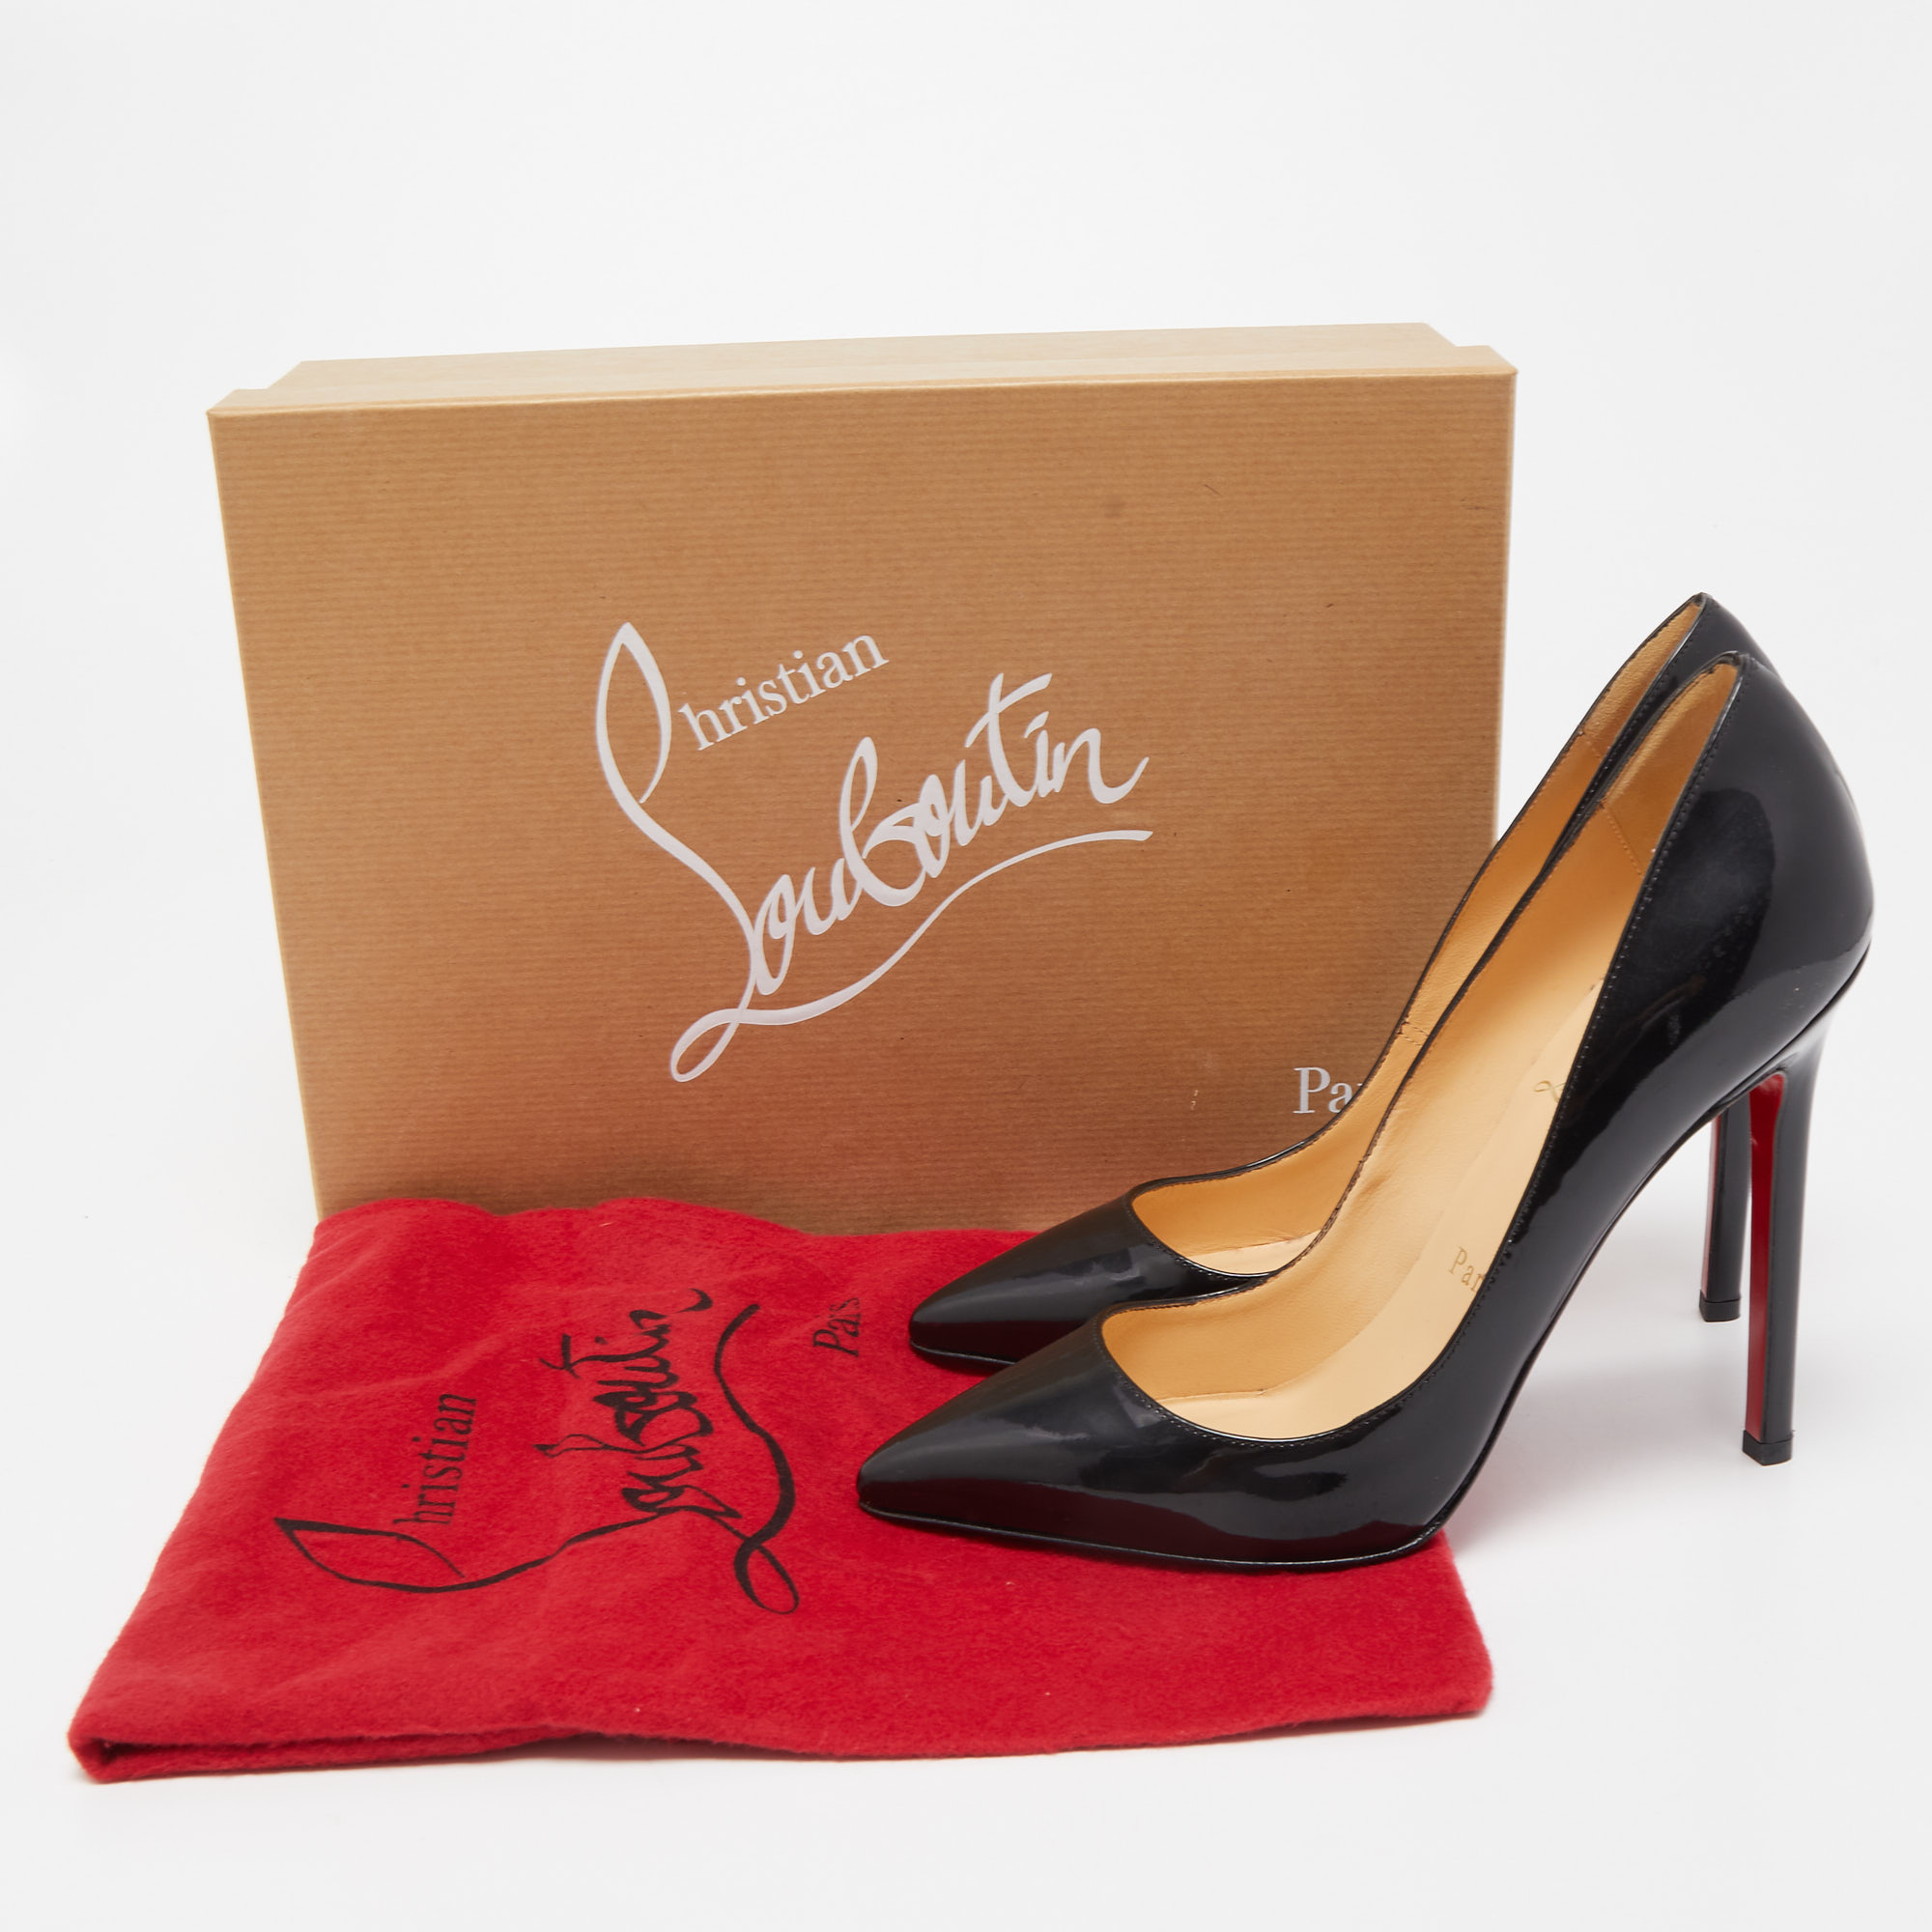 Christian Louboutin Black Patent Leather Pigalle Pumps Size 35.5